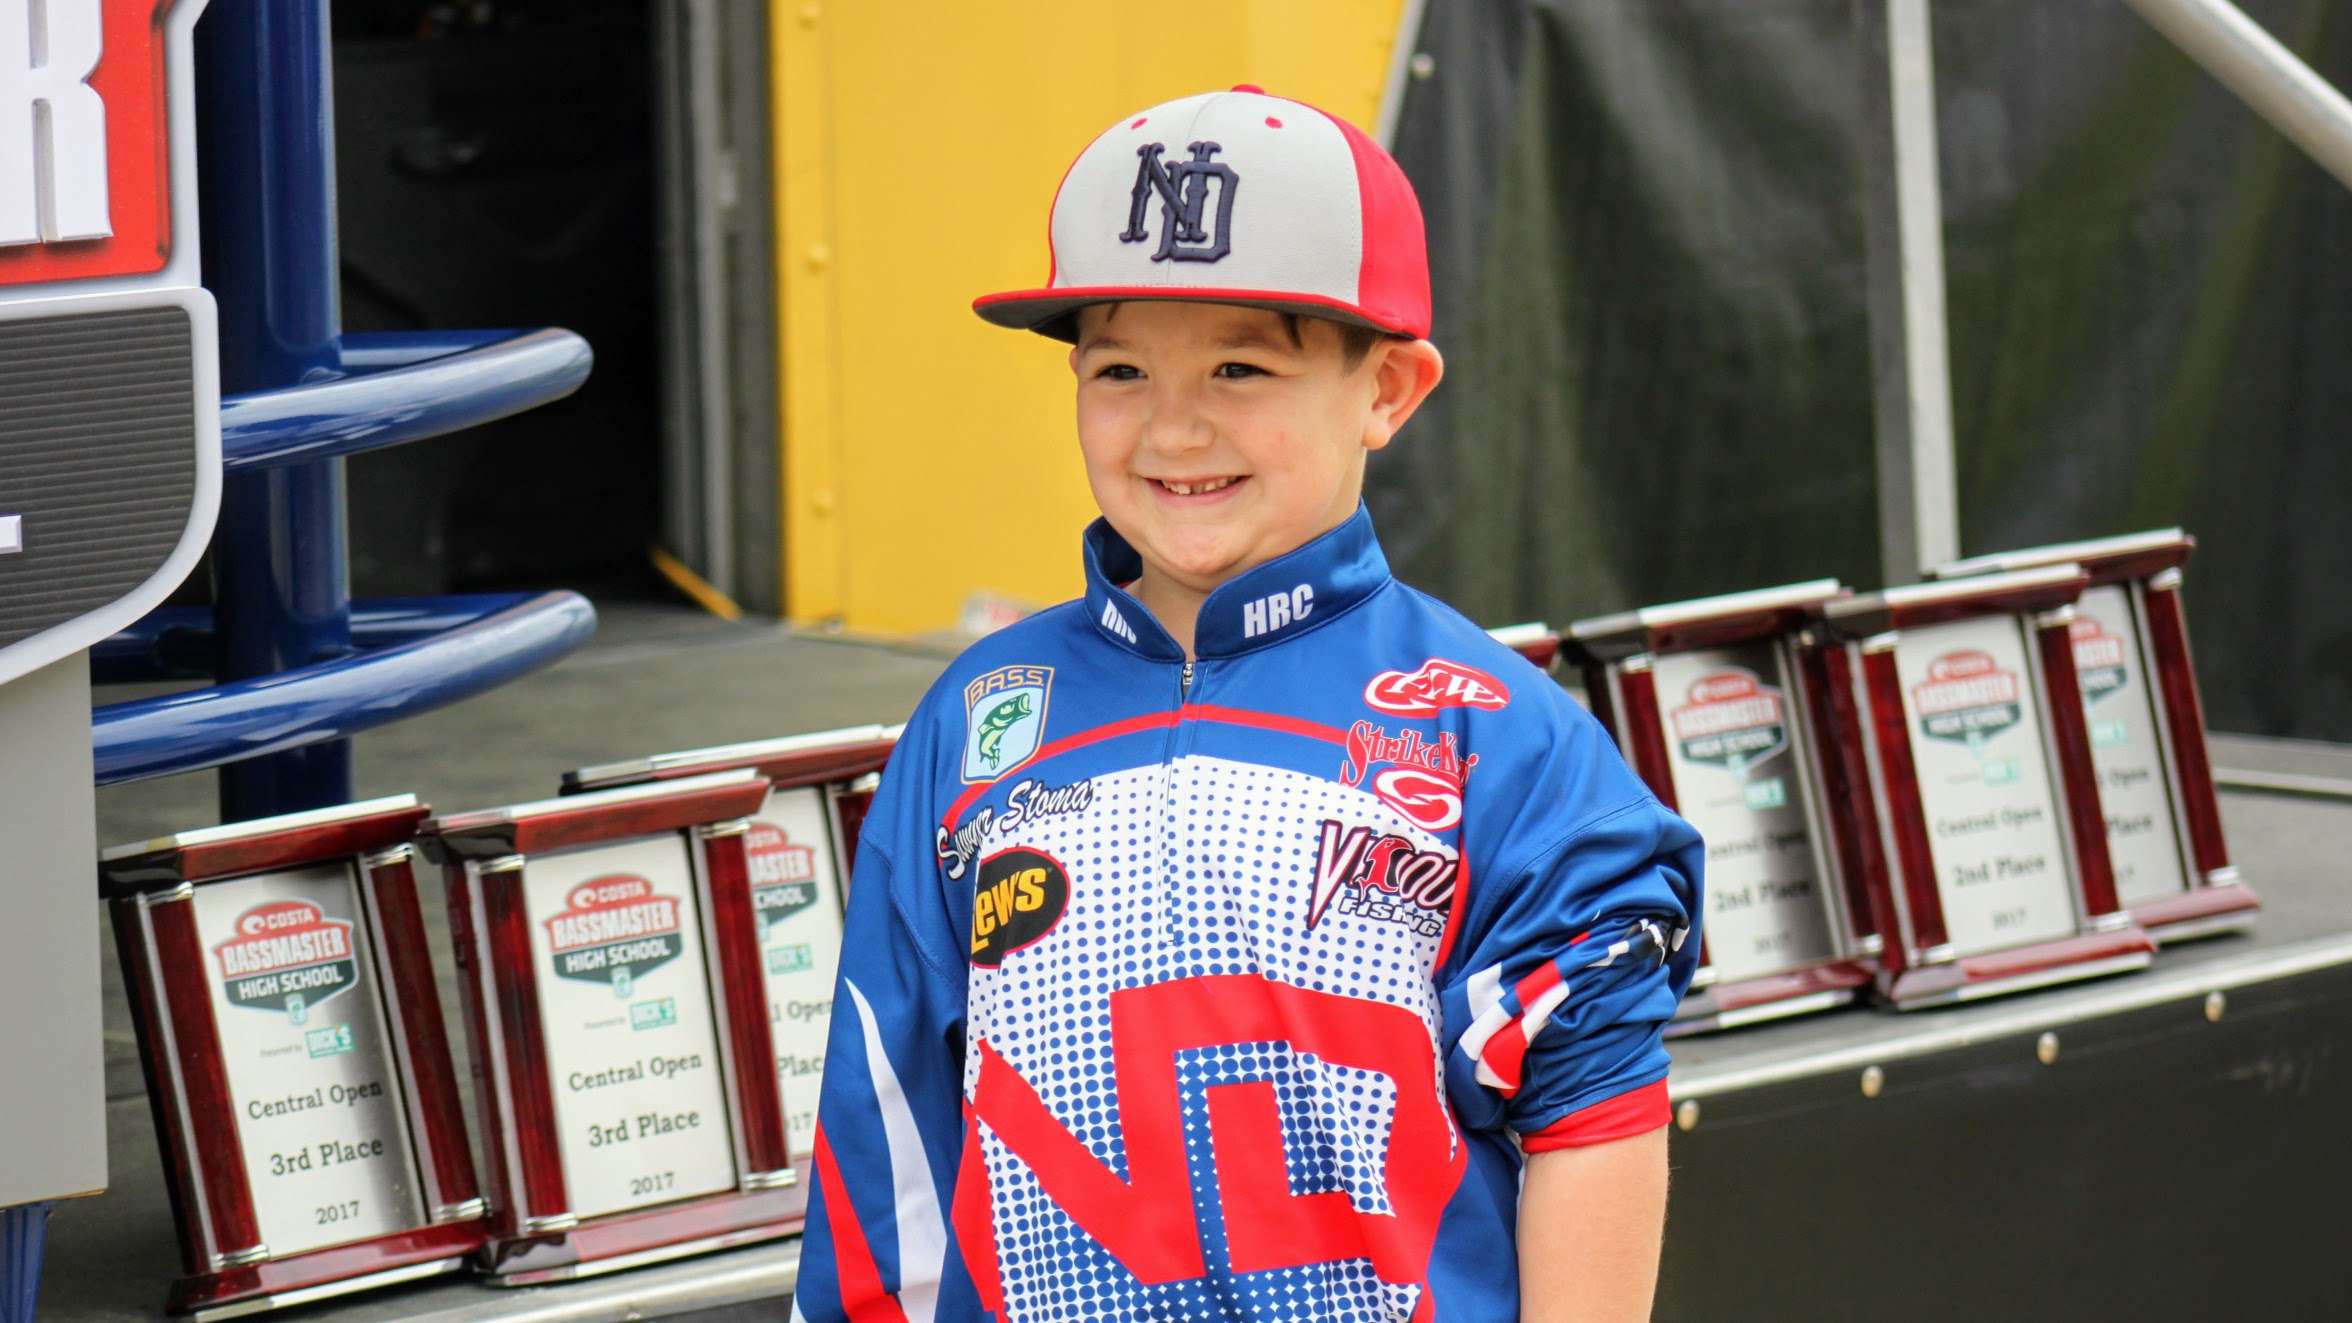 This little fellow also hopes to won day compete on the Bassmaster
  High School circuit. Parents and young children were in abundance at
  registration, launch, and weigh-in, proving that the future of bass
  fishing is as bright as ever.